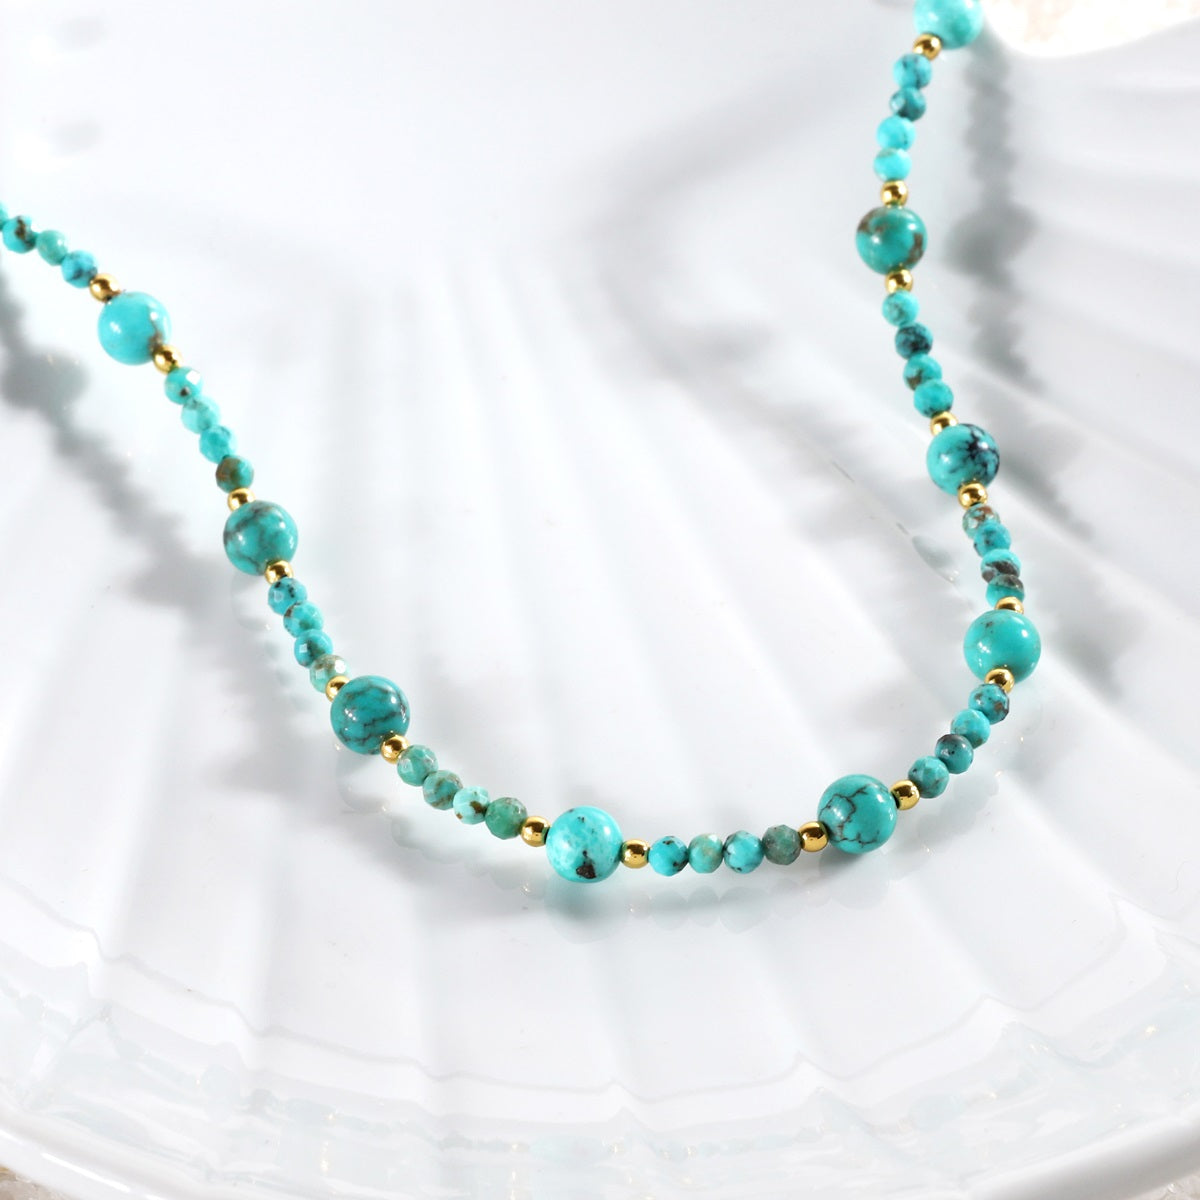 Side View of Turquoise and Hematite Necklace